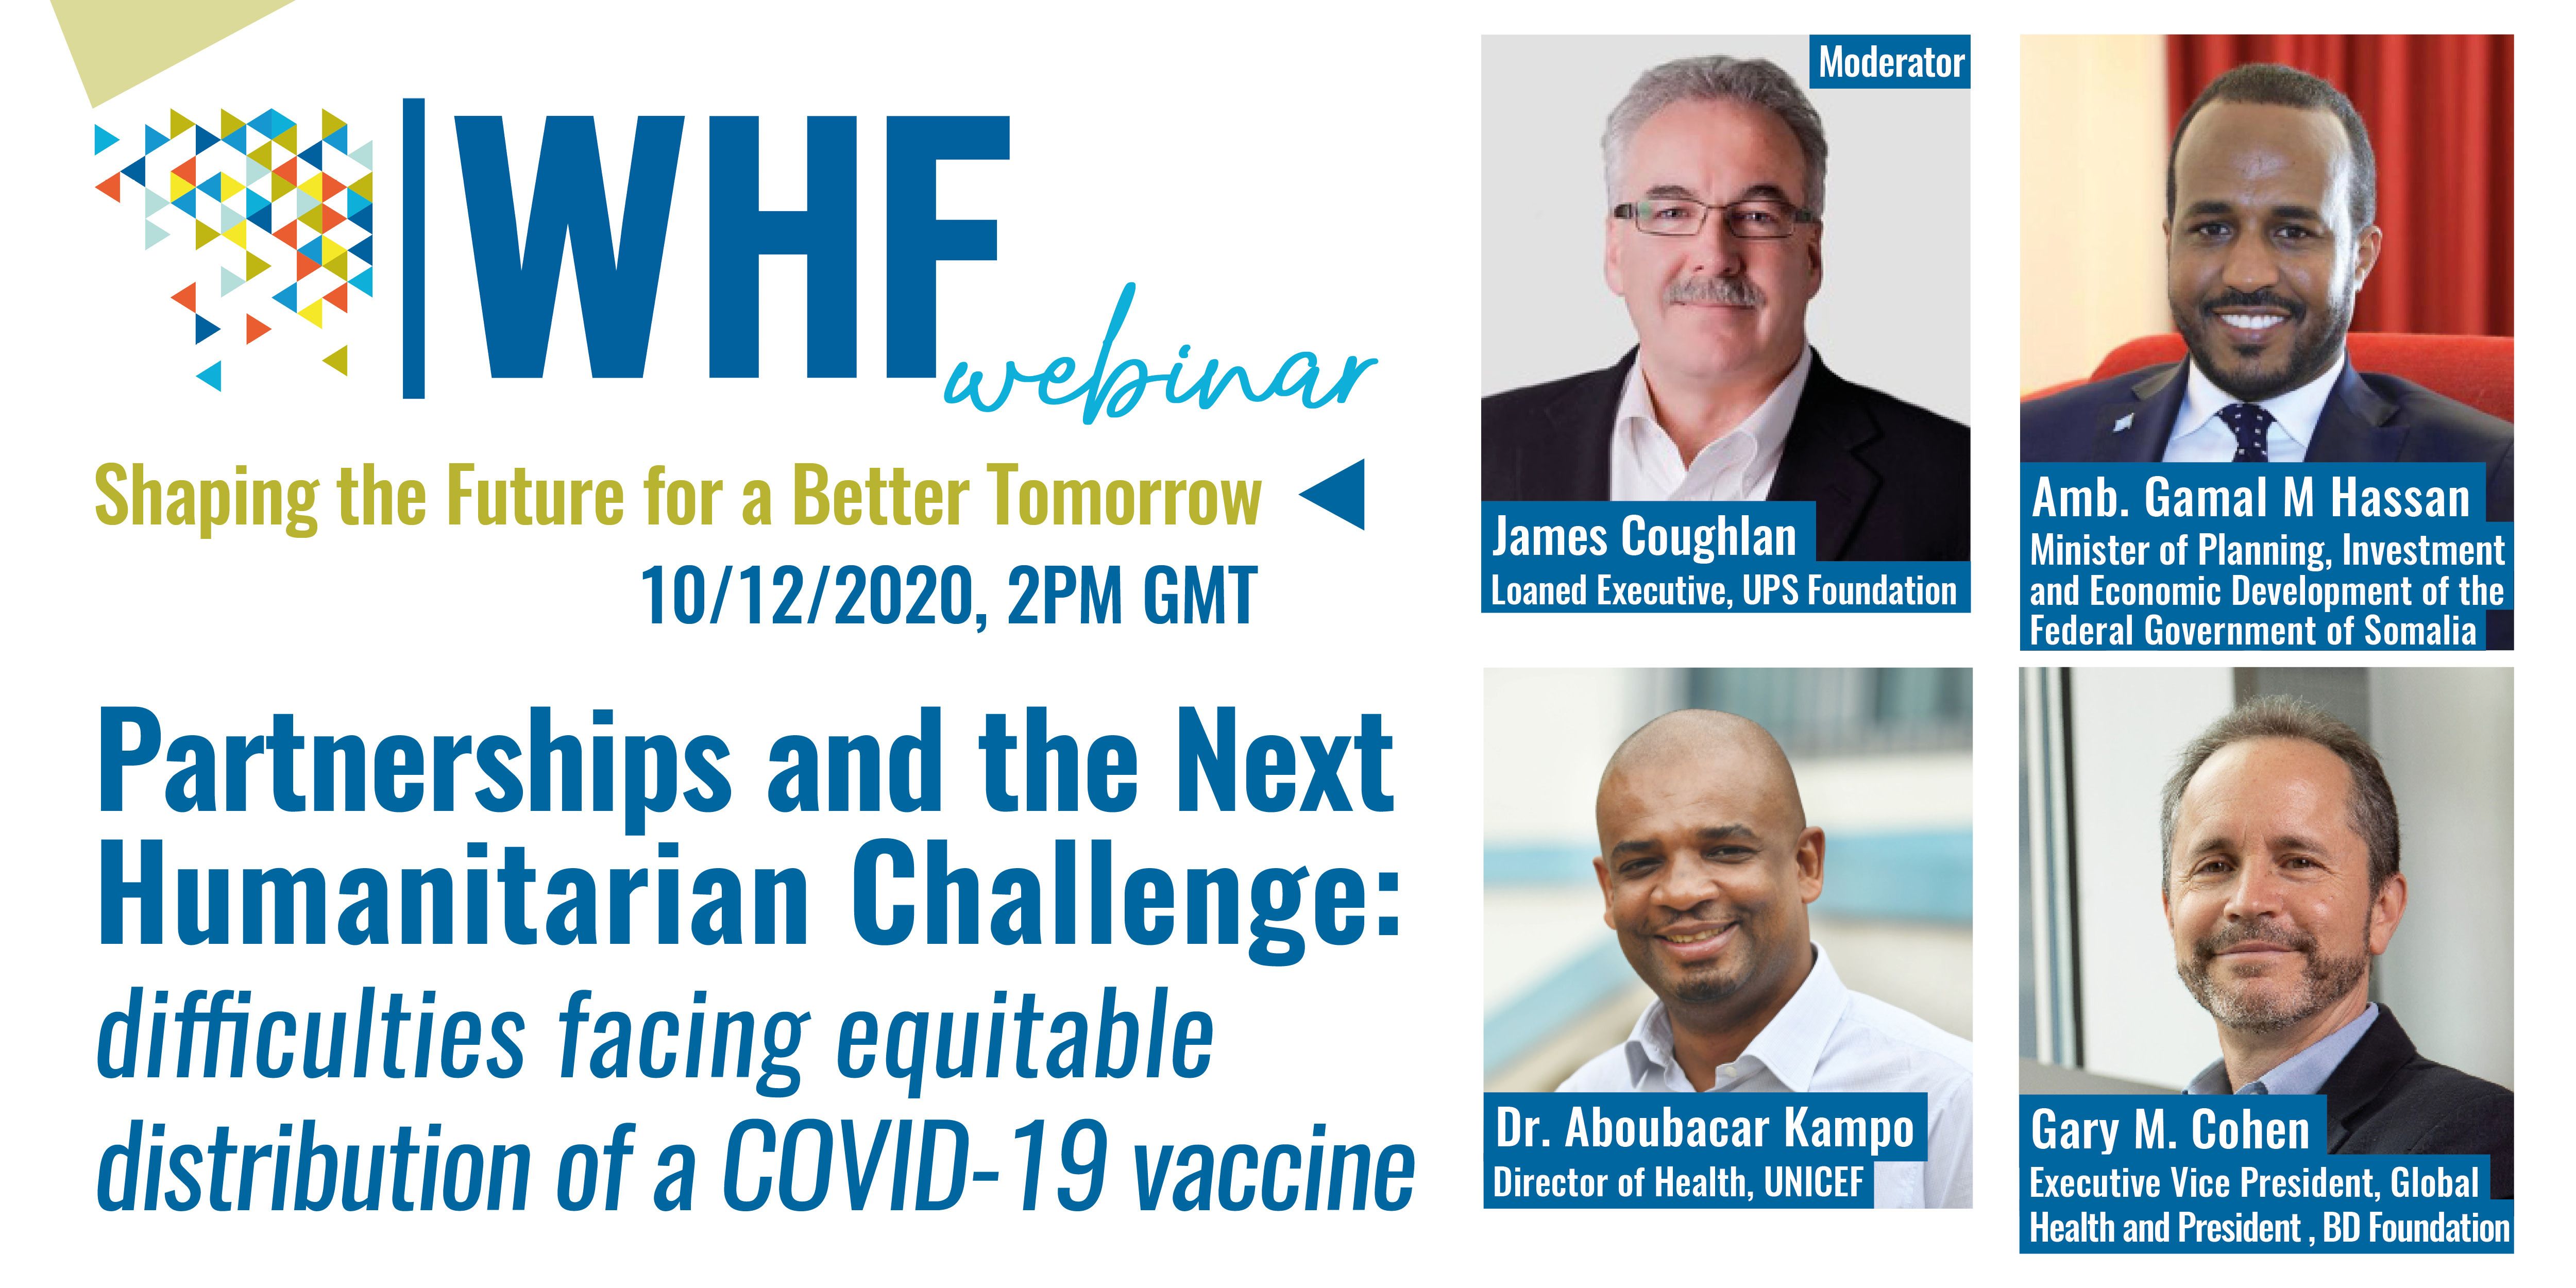 Partnerships and the Next Humanitarian Challenge: difficulties facing equitable distribution of a COVID-19 vaccine